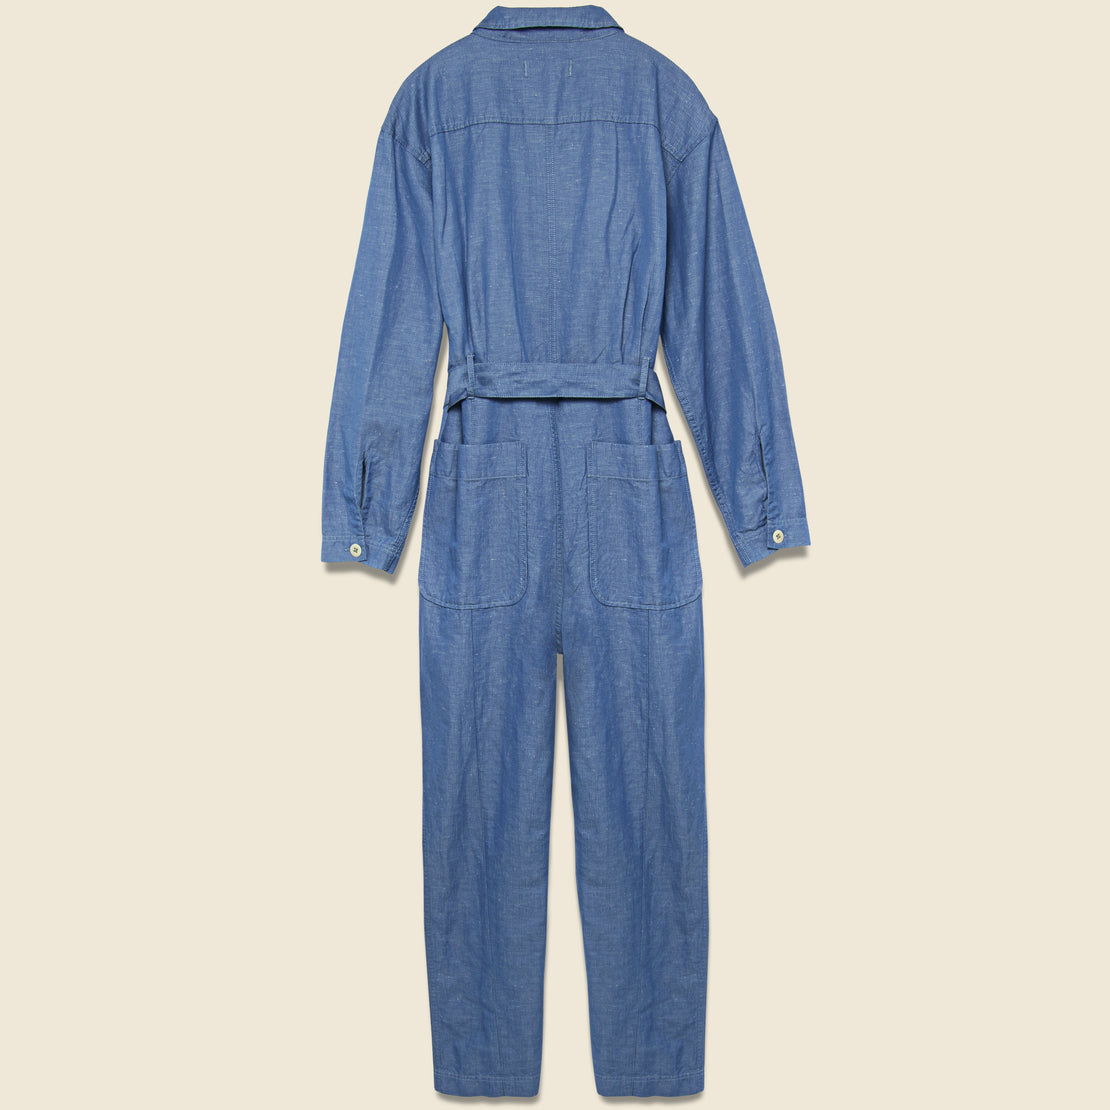 Expedition Jumpsuit - Chambray - Alex Mill - STAG Provisions - W - Onepiece - Jumpsuit